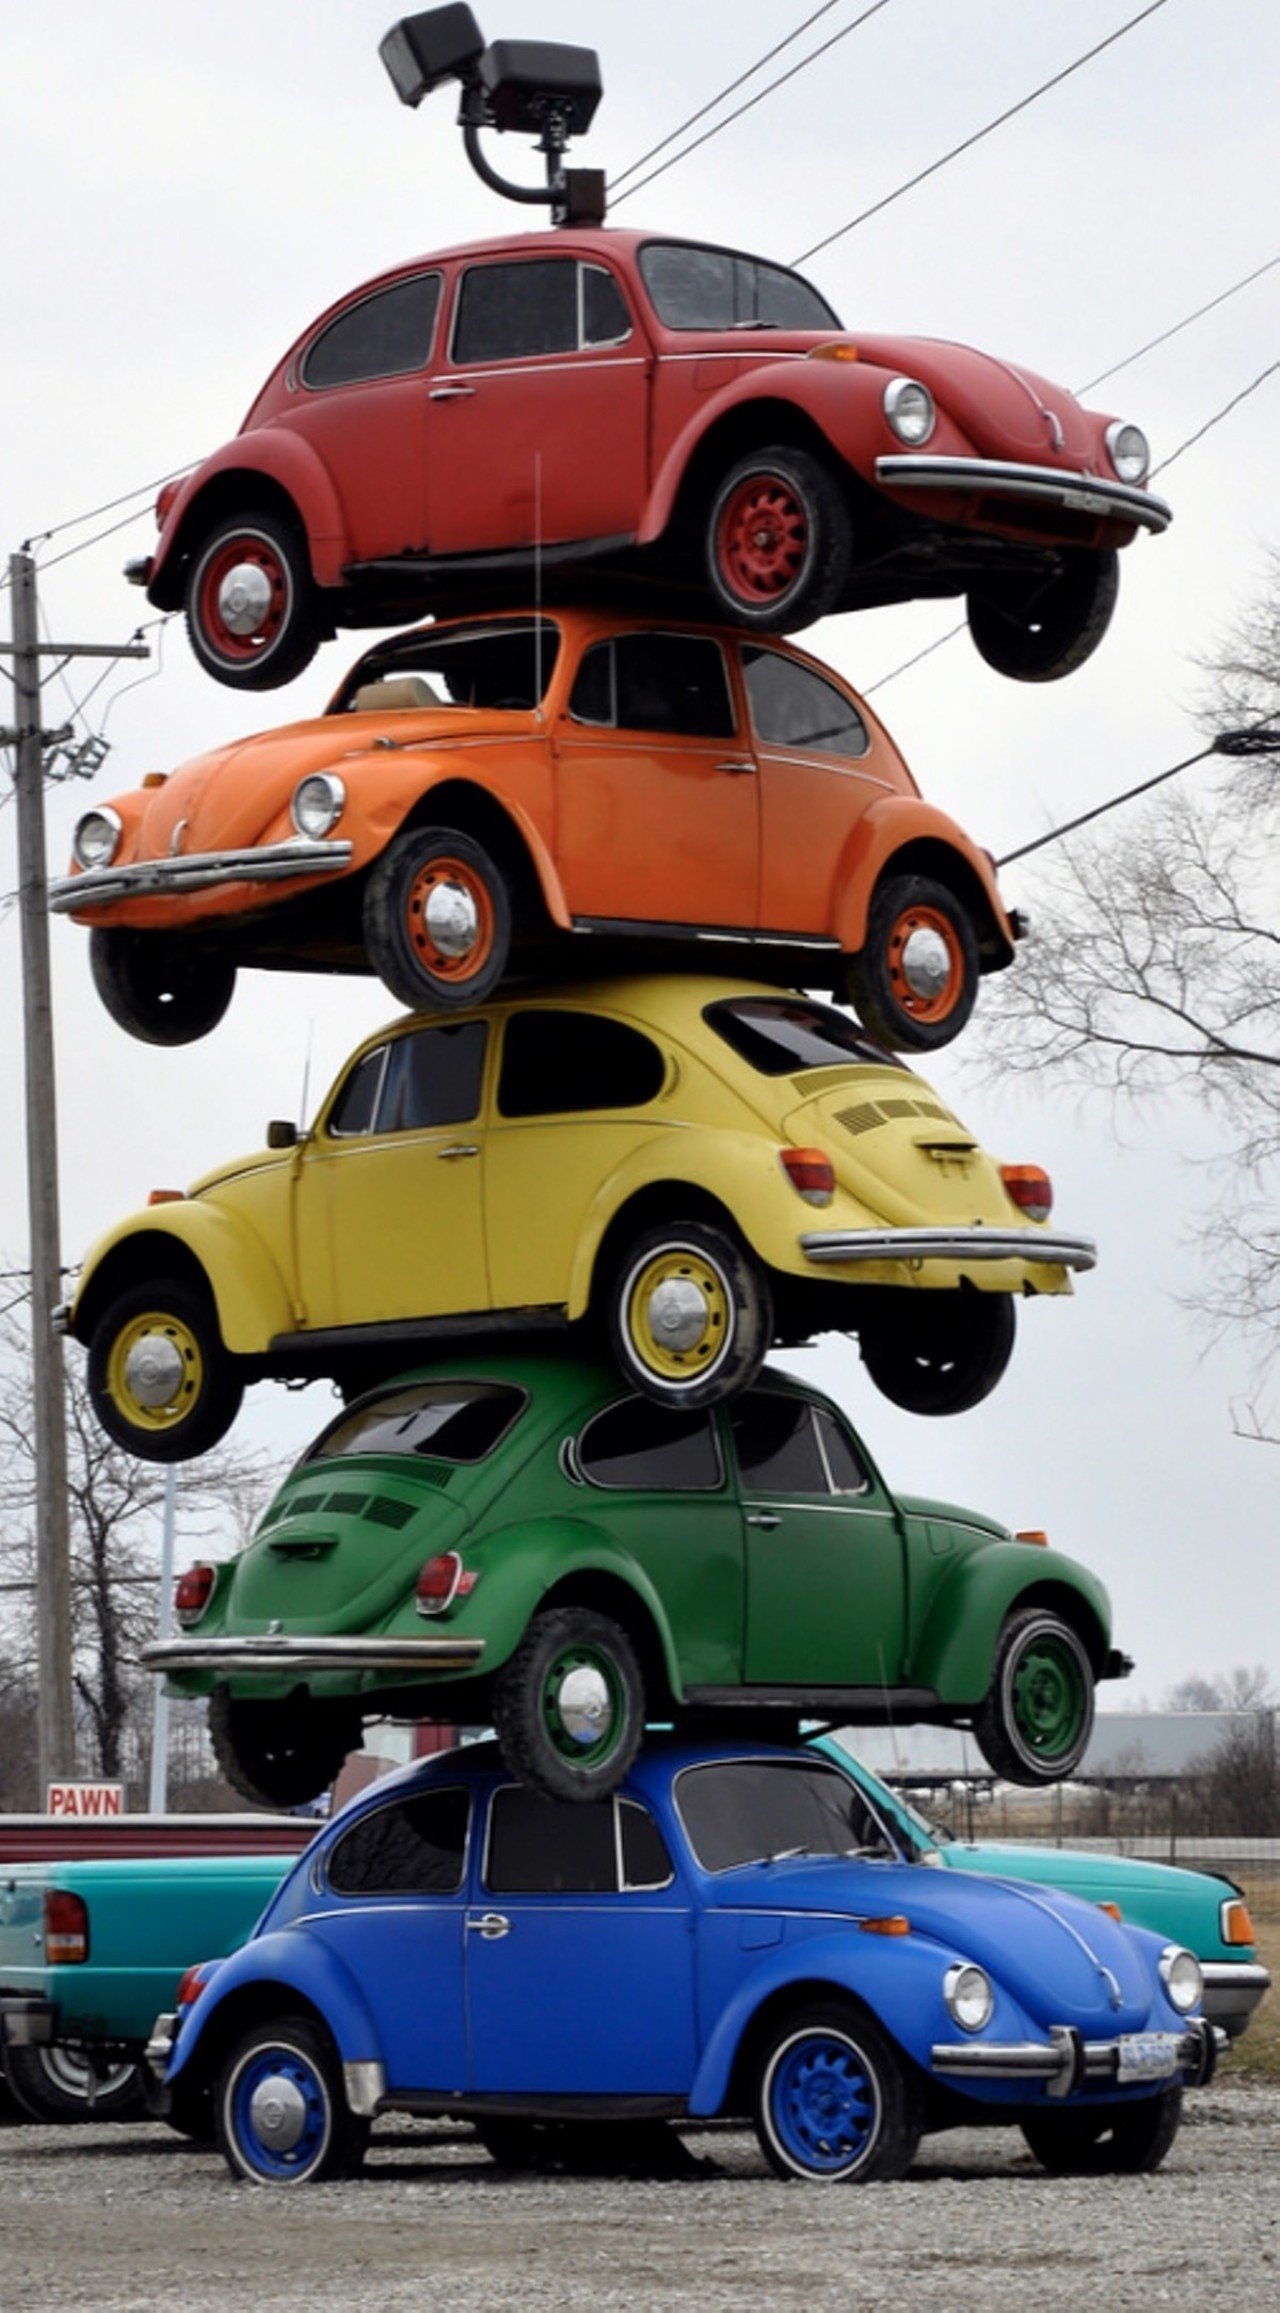 Tower of VW Bugs
1938 East Second St., Defiance
Travel on I-80 to Defiance to see this stack of ‘60s Volkswagen Beetles. Five bugs are stacked on top of each other in the parking lot of Pack Rat’s Pawn Shop.